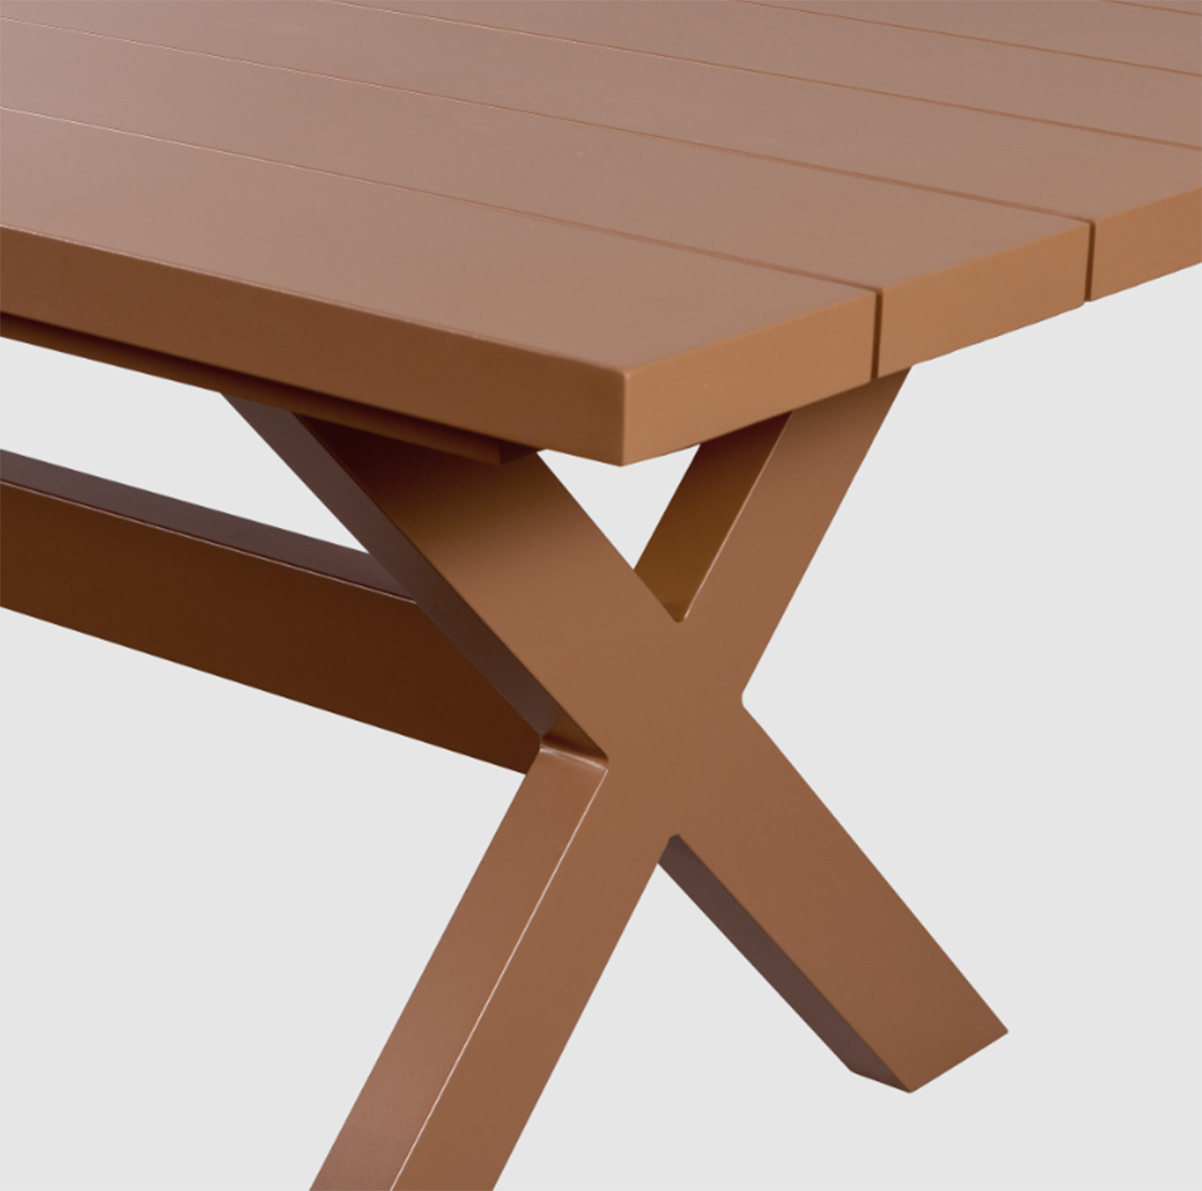 DELTA DINING TABLE OUTDOOR1